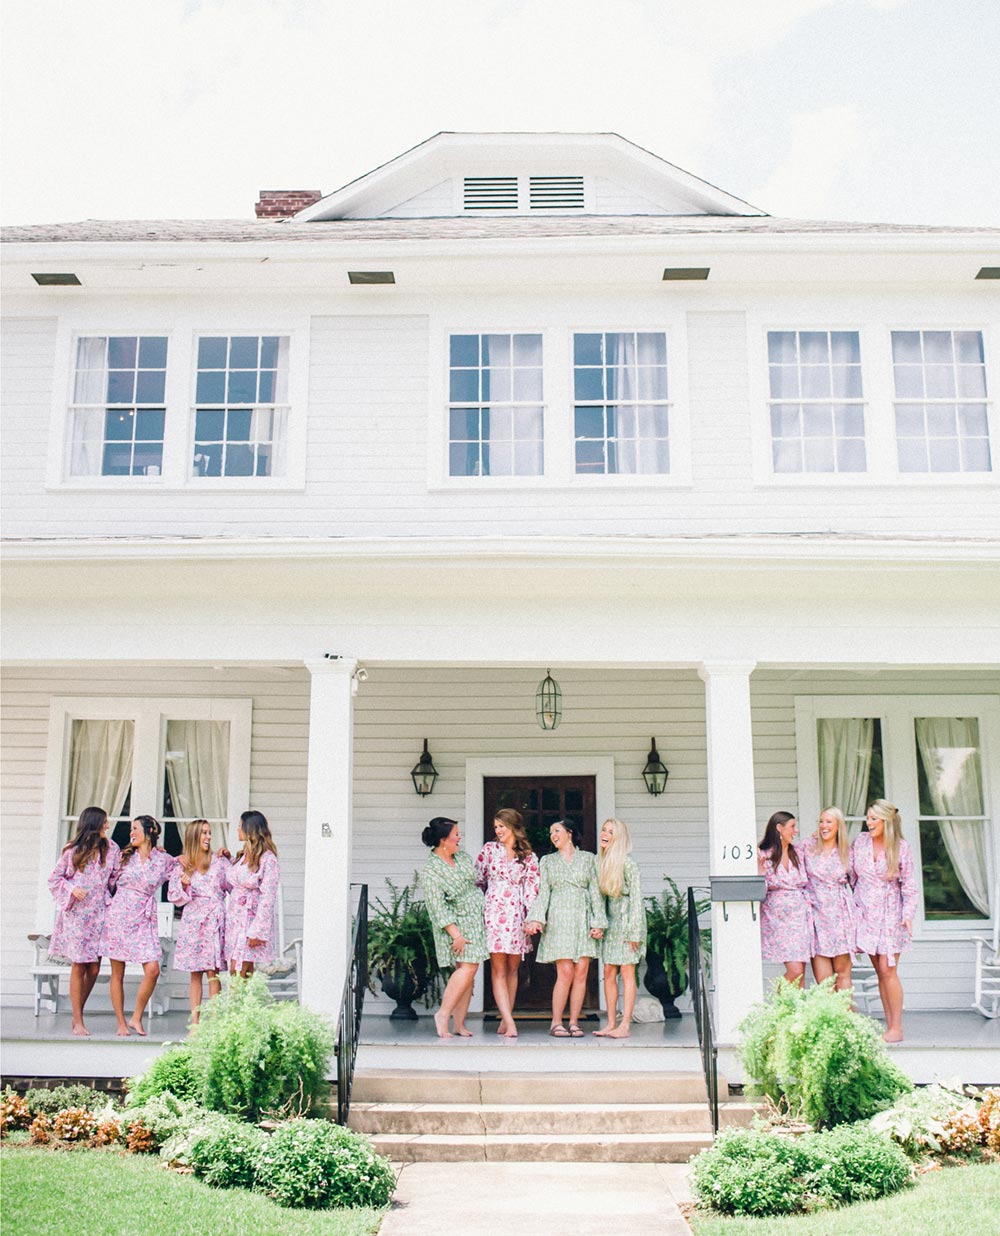 Bridesmaids Outdoor Photography in Robes on Porch